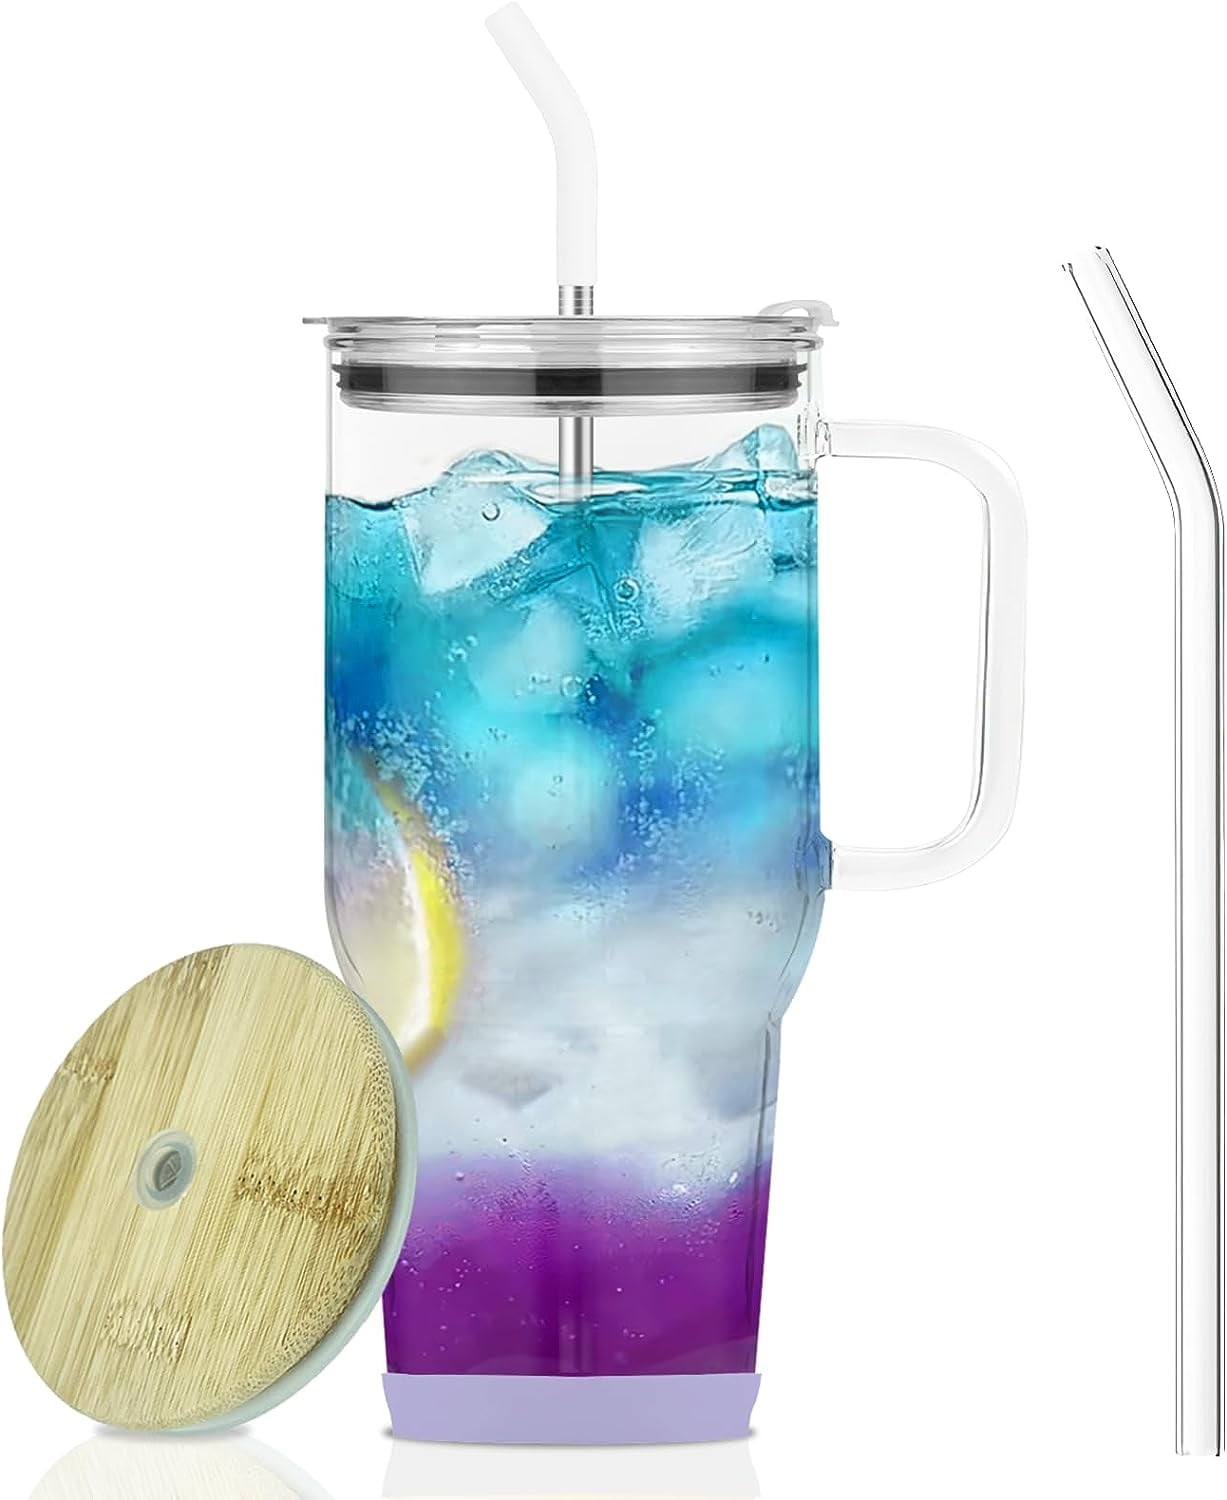 25pcs 32oz Glass Tumbler Cups With Handle & Silicone Sleeve Water Bottle  Iced Beverage Glasses Mugs With Bamboo Lids And Straws